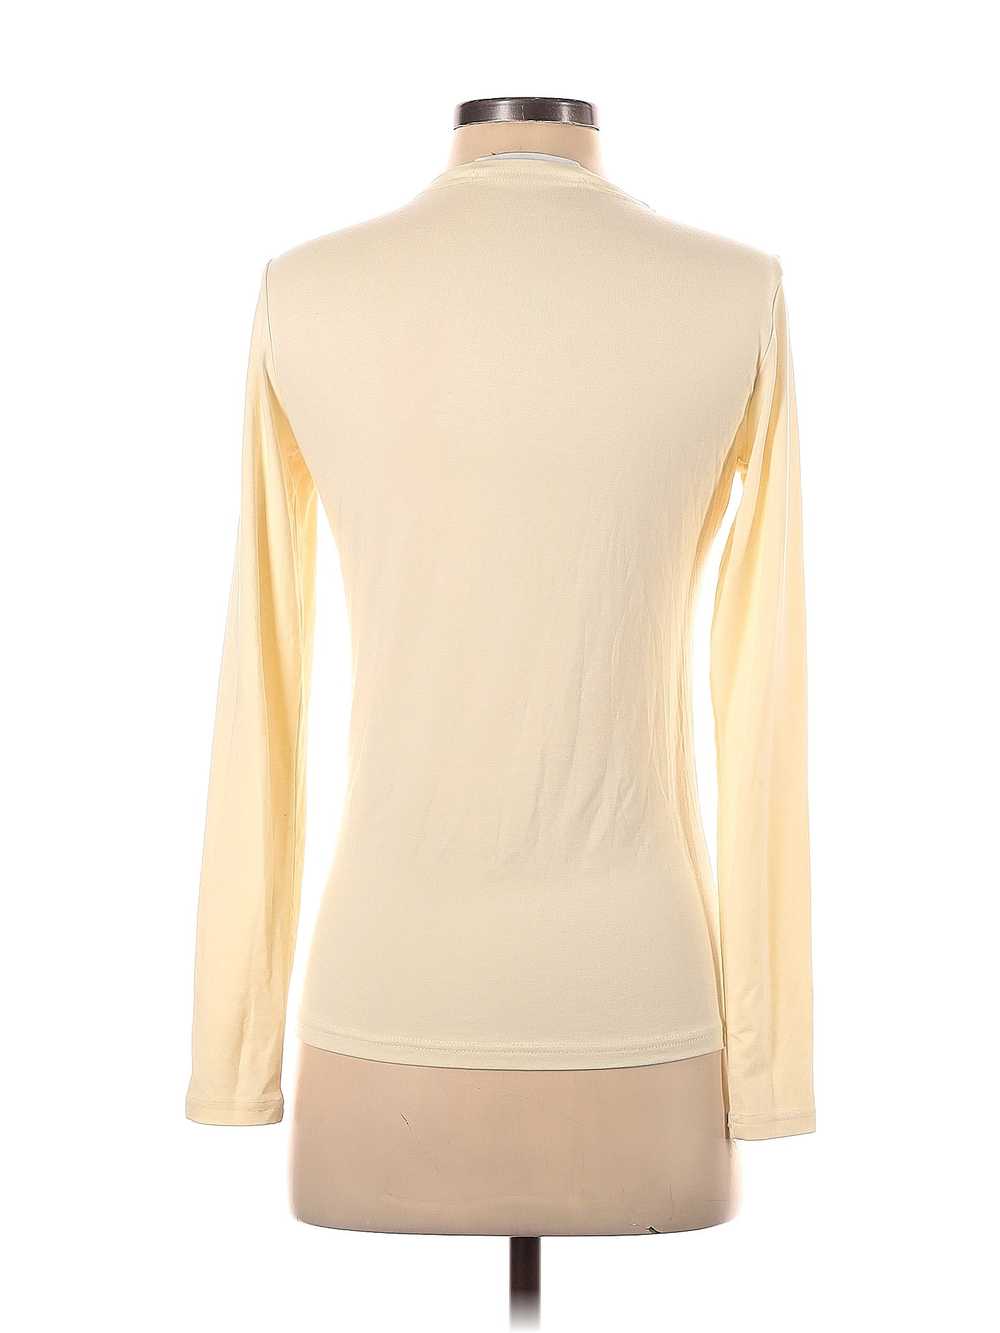 IN:05 Women Ivory Pullover Sweater S - image 2